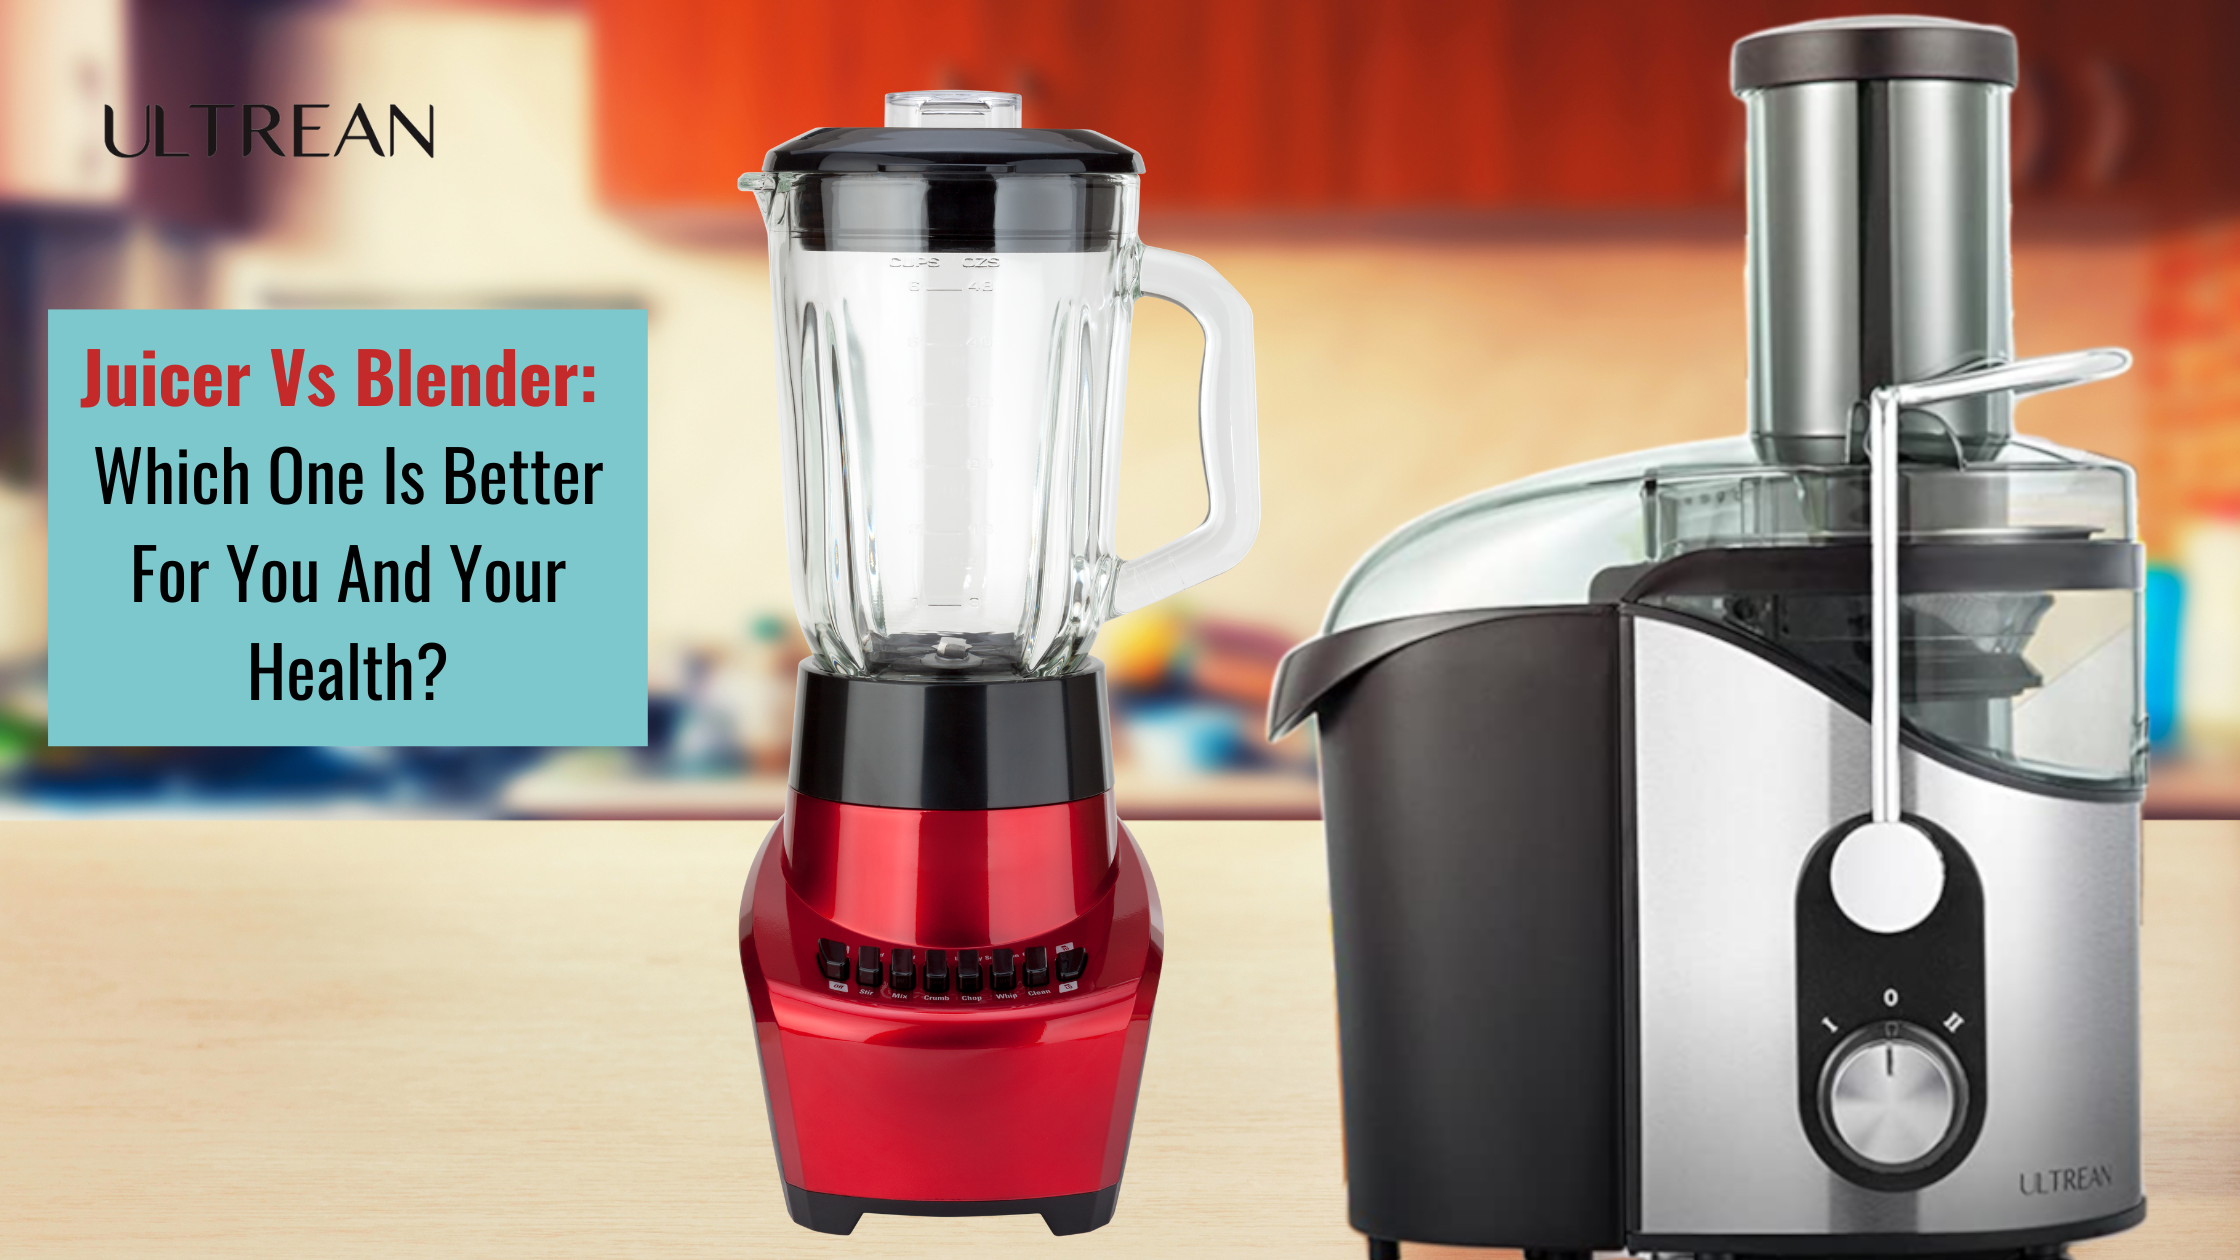 Juicer Vs Blender: Which One Is Better For You And Your Health